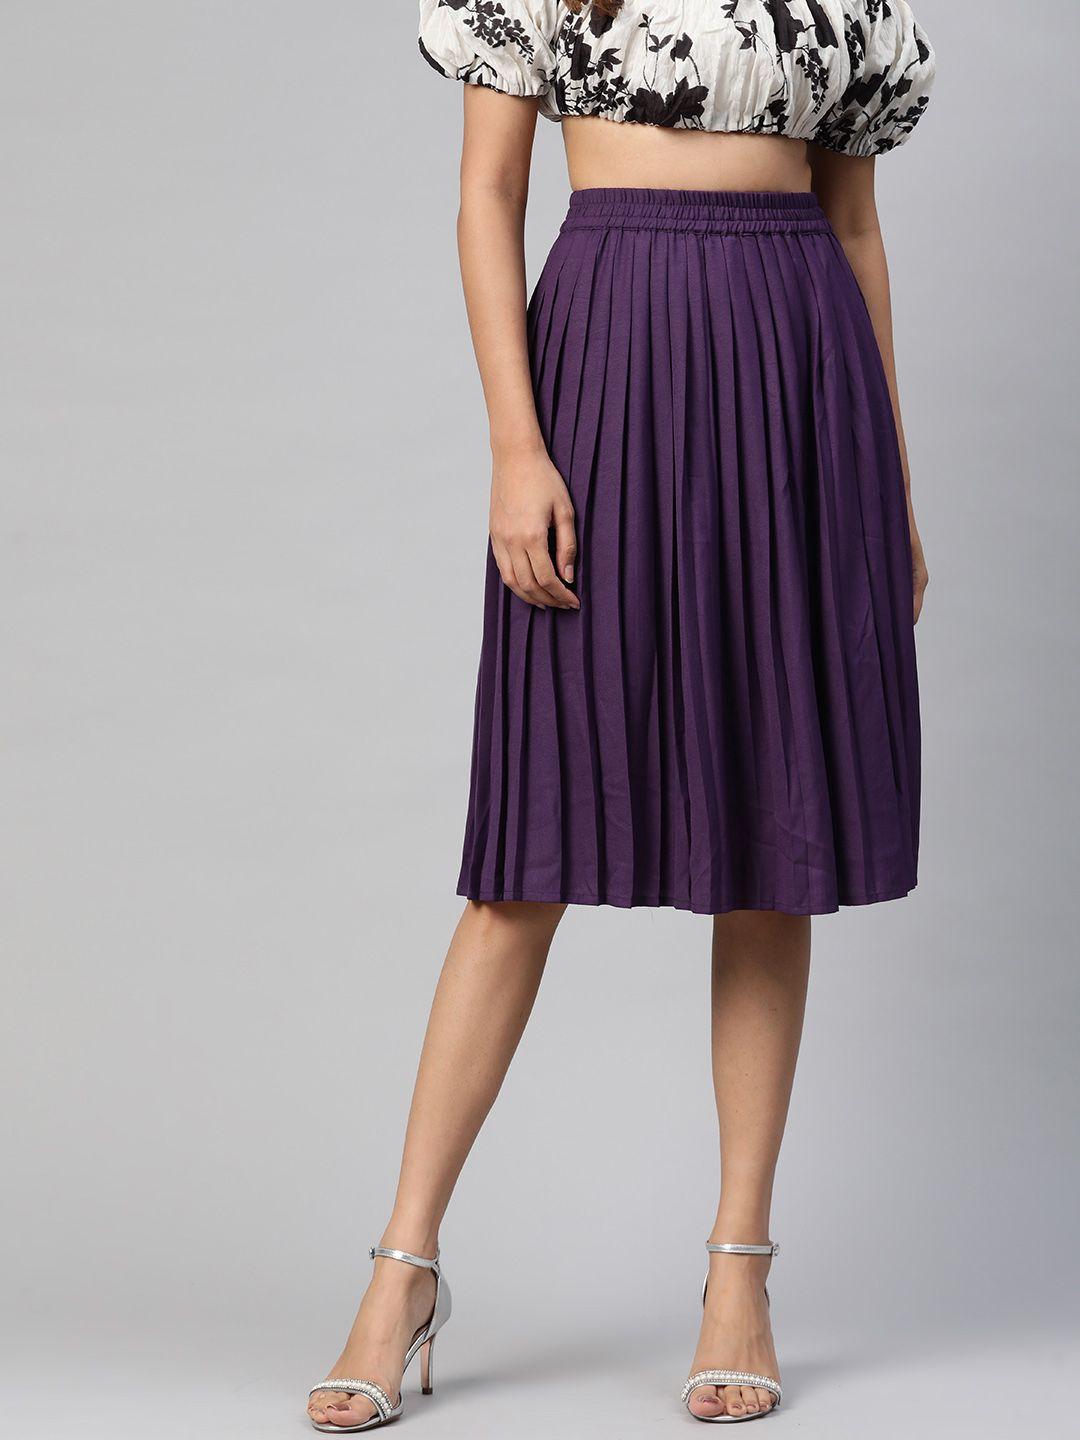 here&now women purple accordion pleated a-line skirt